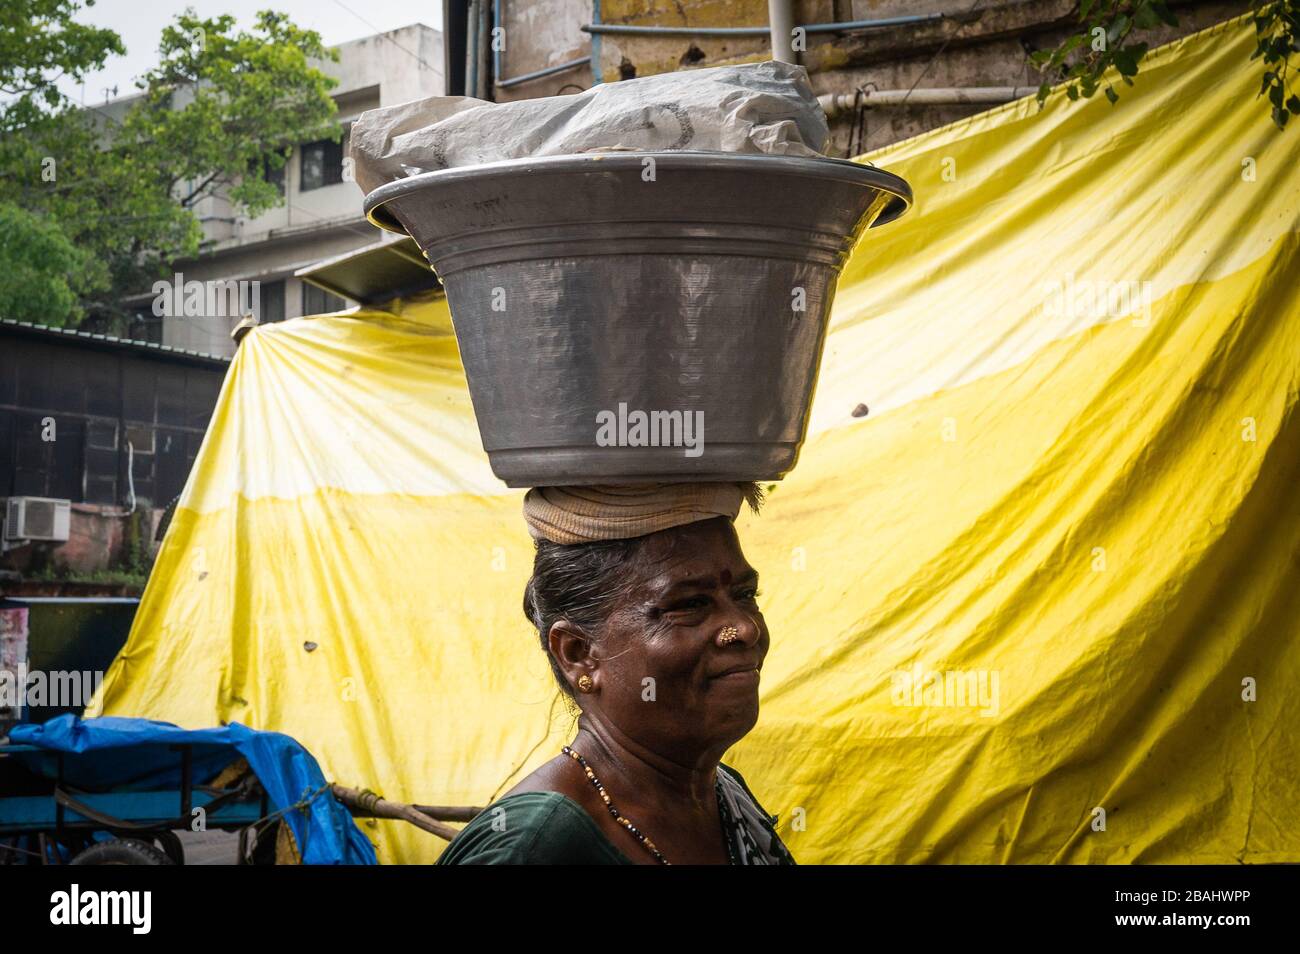 Woman walking with a load on her head, Chennai, India Stock Photo